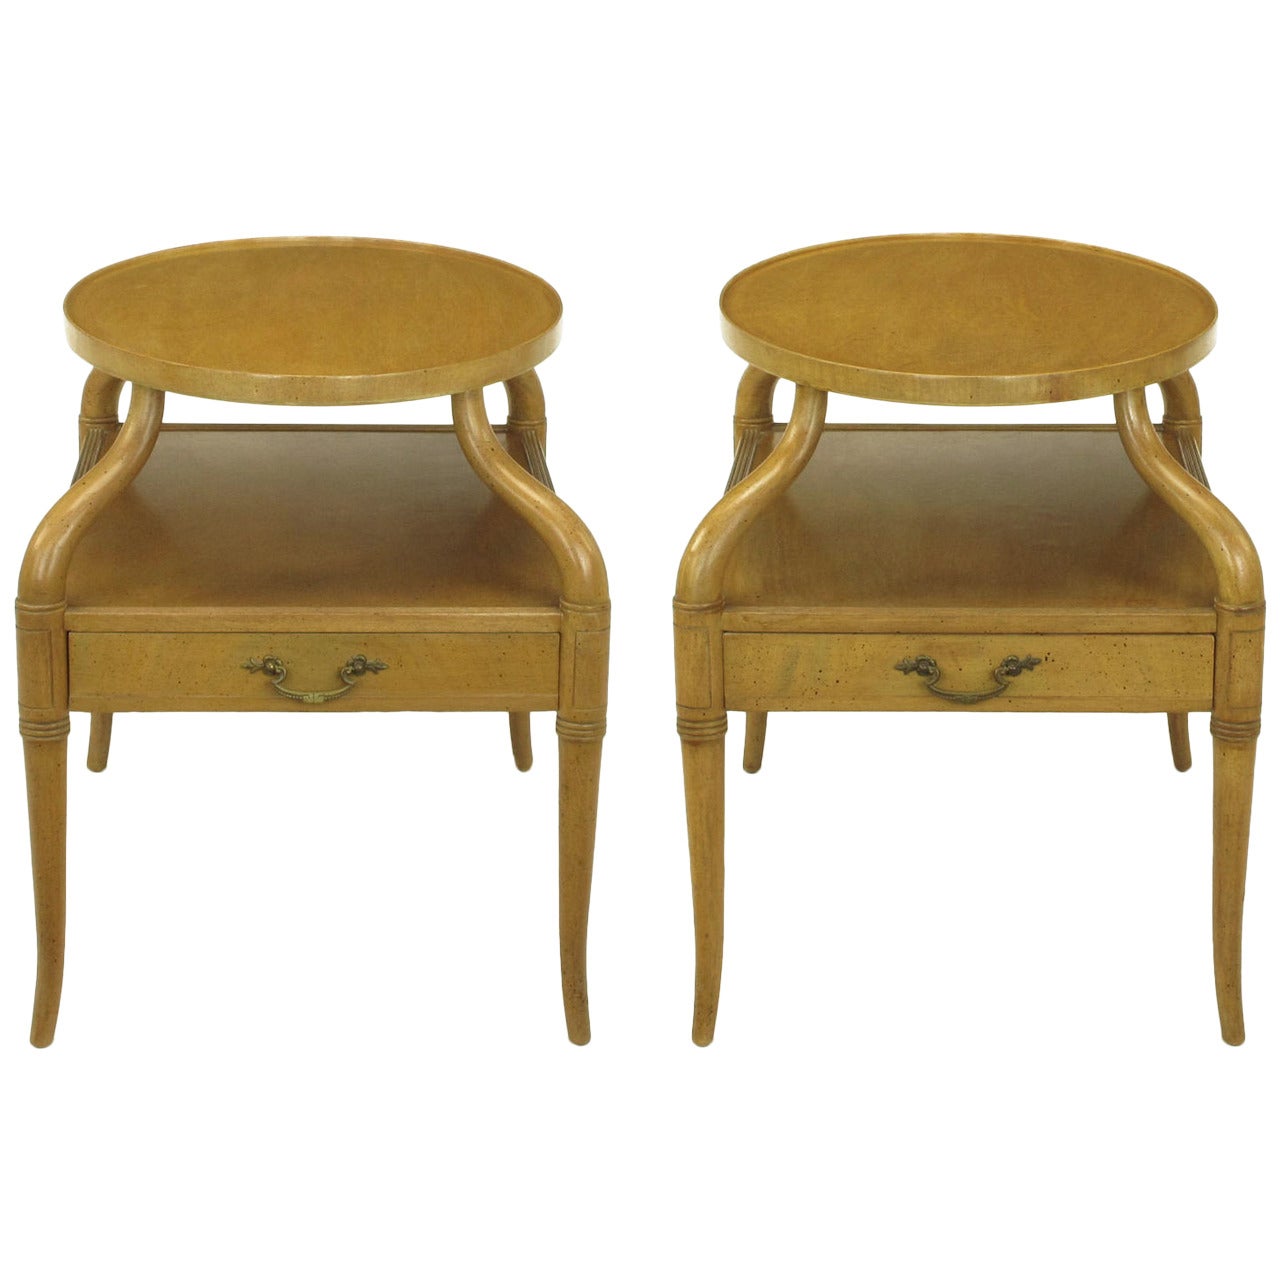 Pair of 1940s Mahogany Plateau Side Tables with Sinuous Legs For Sale